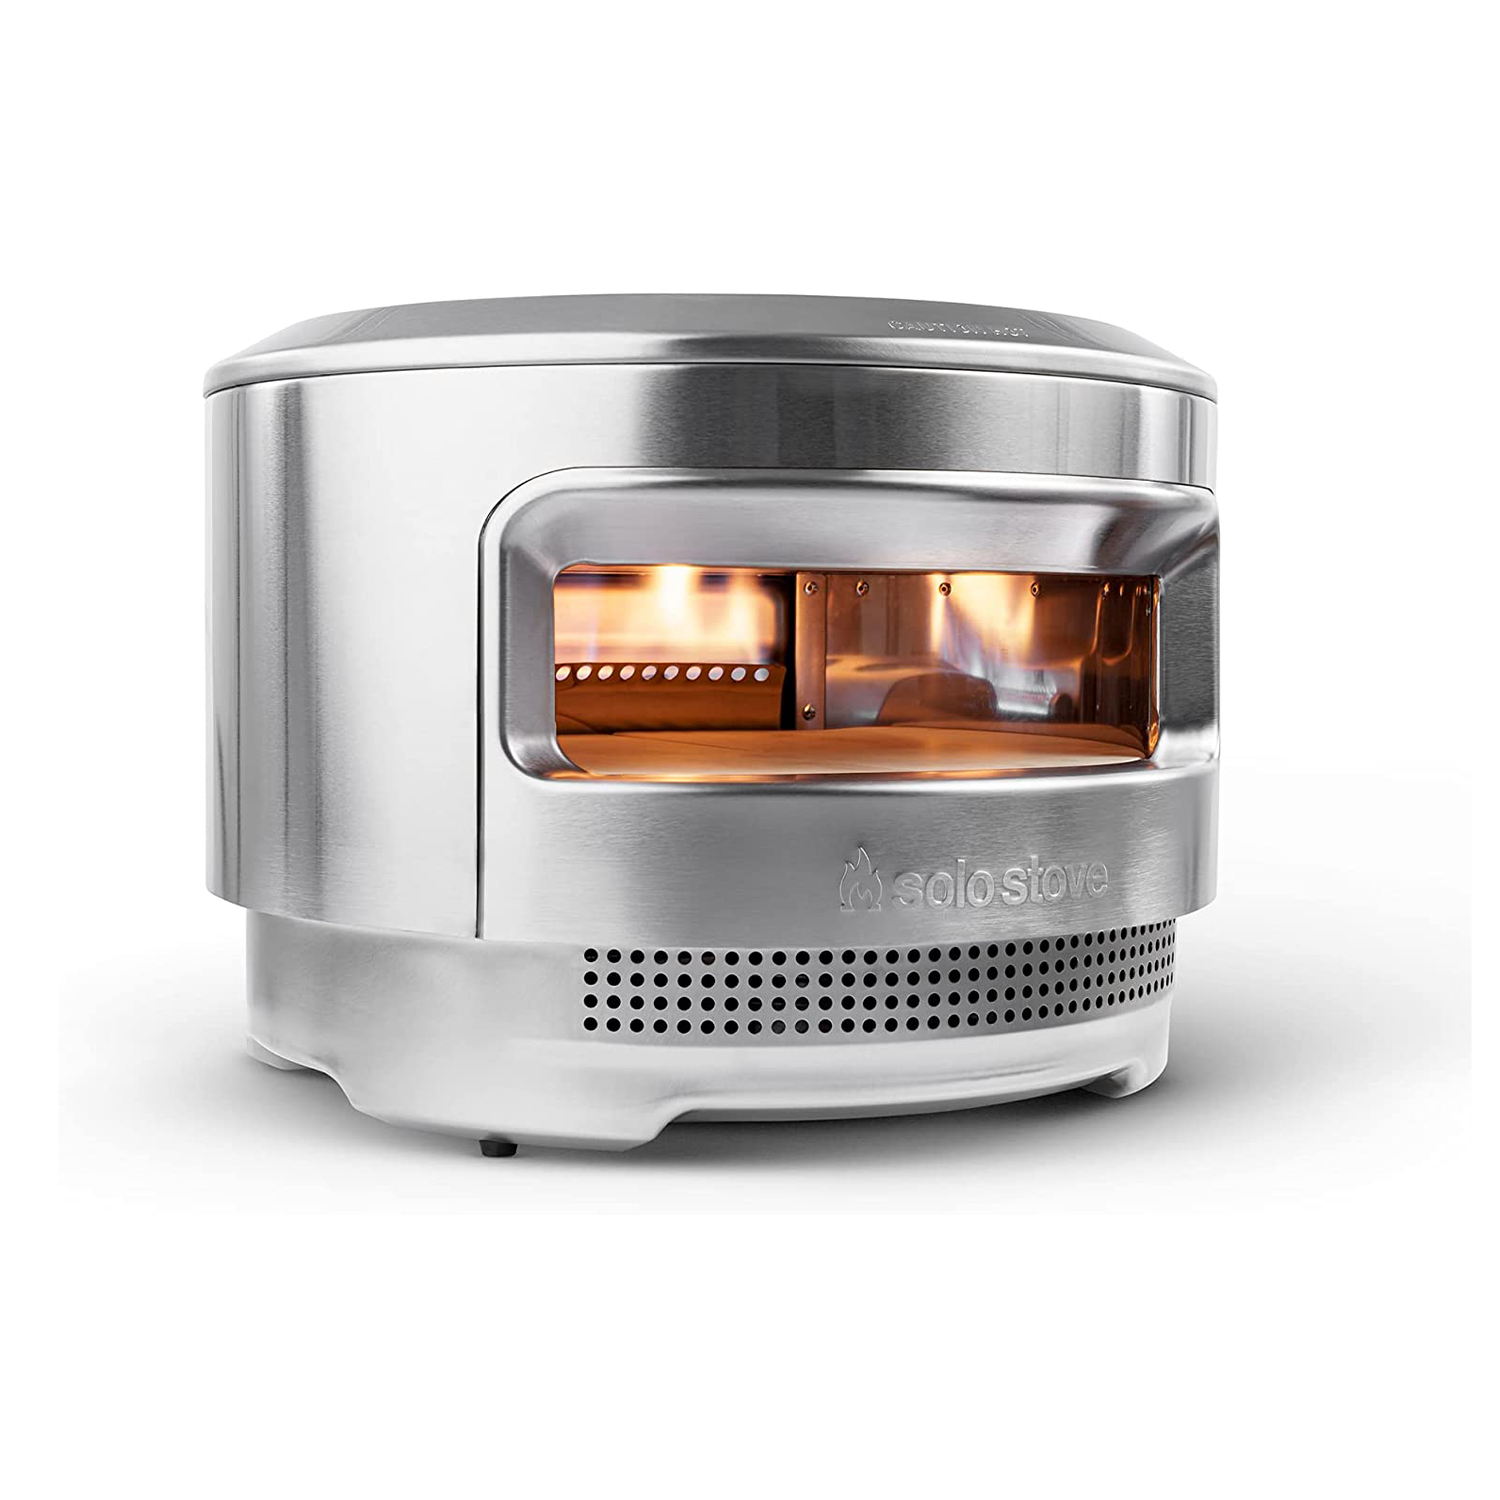 Solo Stove Pi Pizza Oven, stainless steel finish